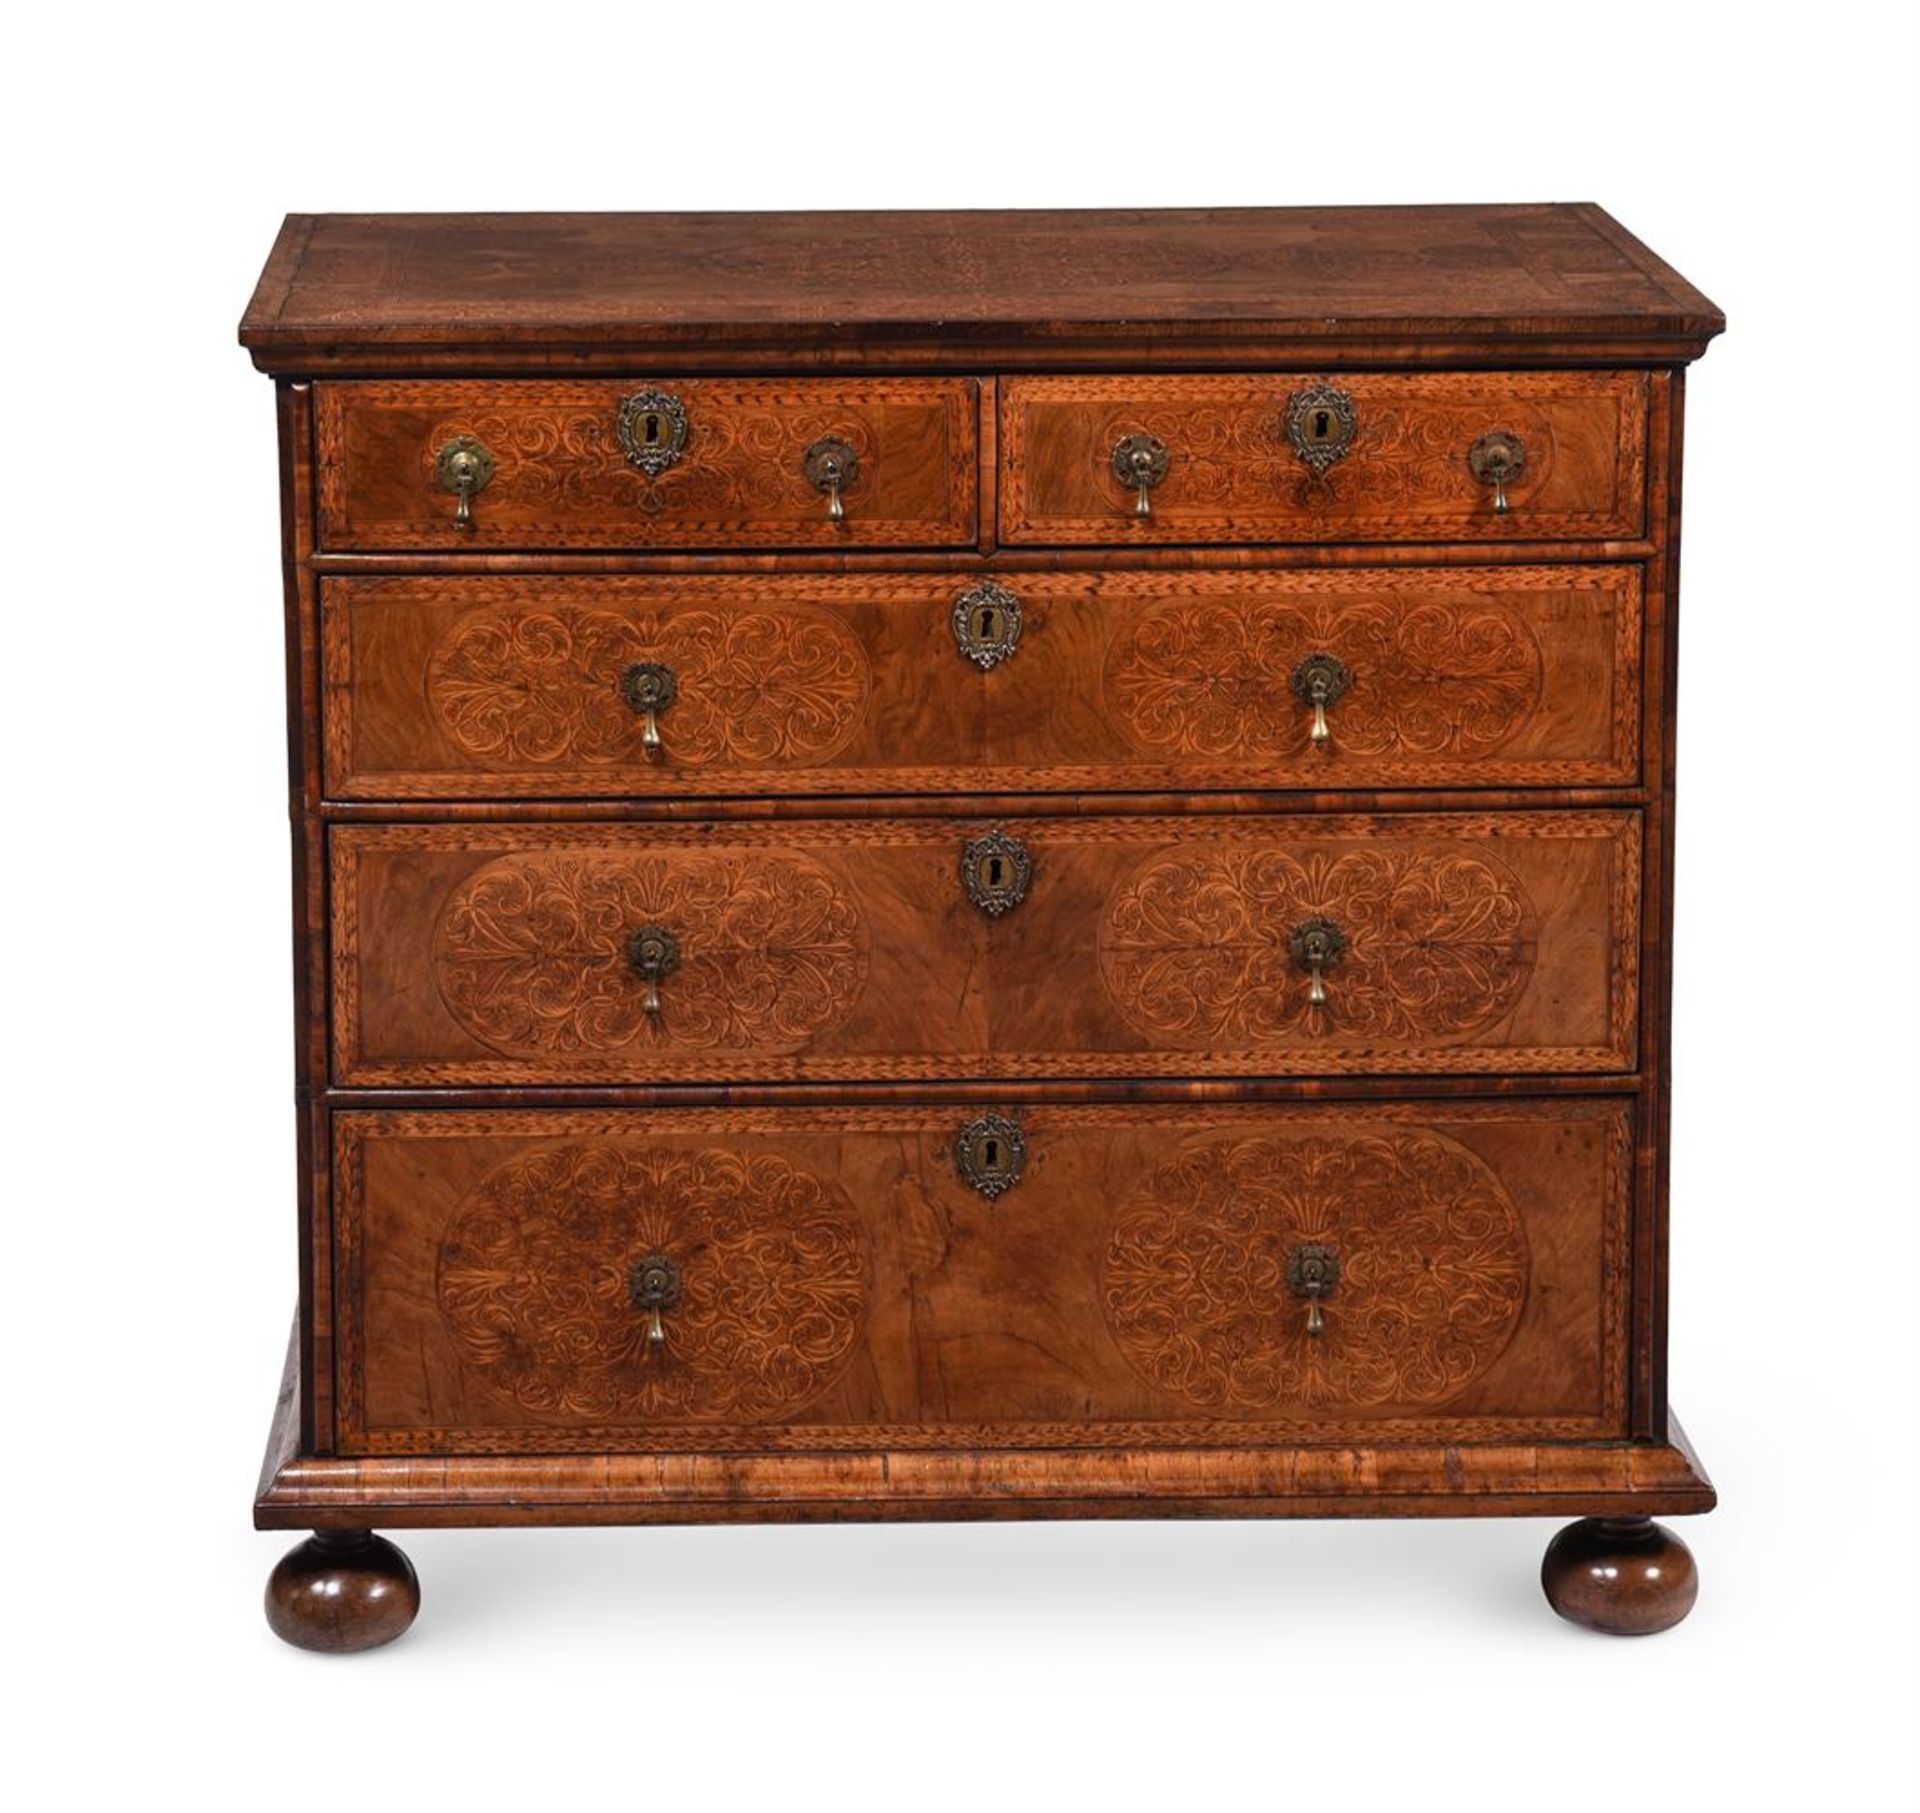 A WILLIAM & MARY WALNUT AND SEAWEED MARQUETRY CHEST OF DRAWERSIN THE MANNER OF GERRIT JENSEN - Image 3 of 6